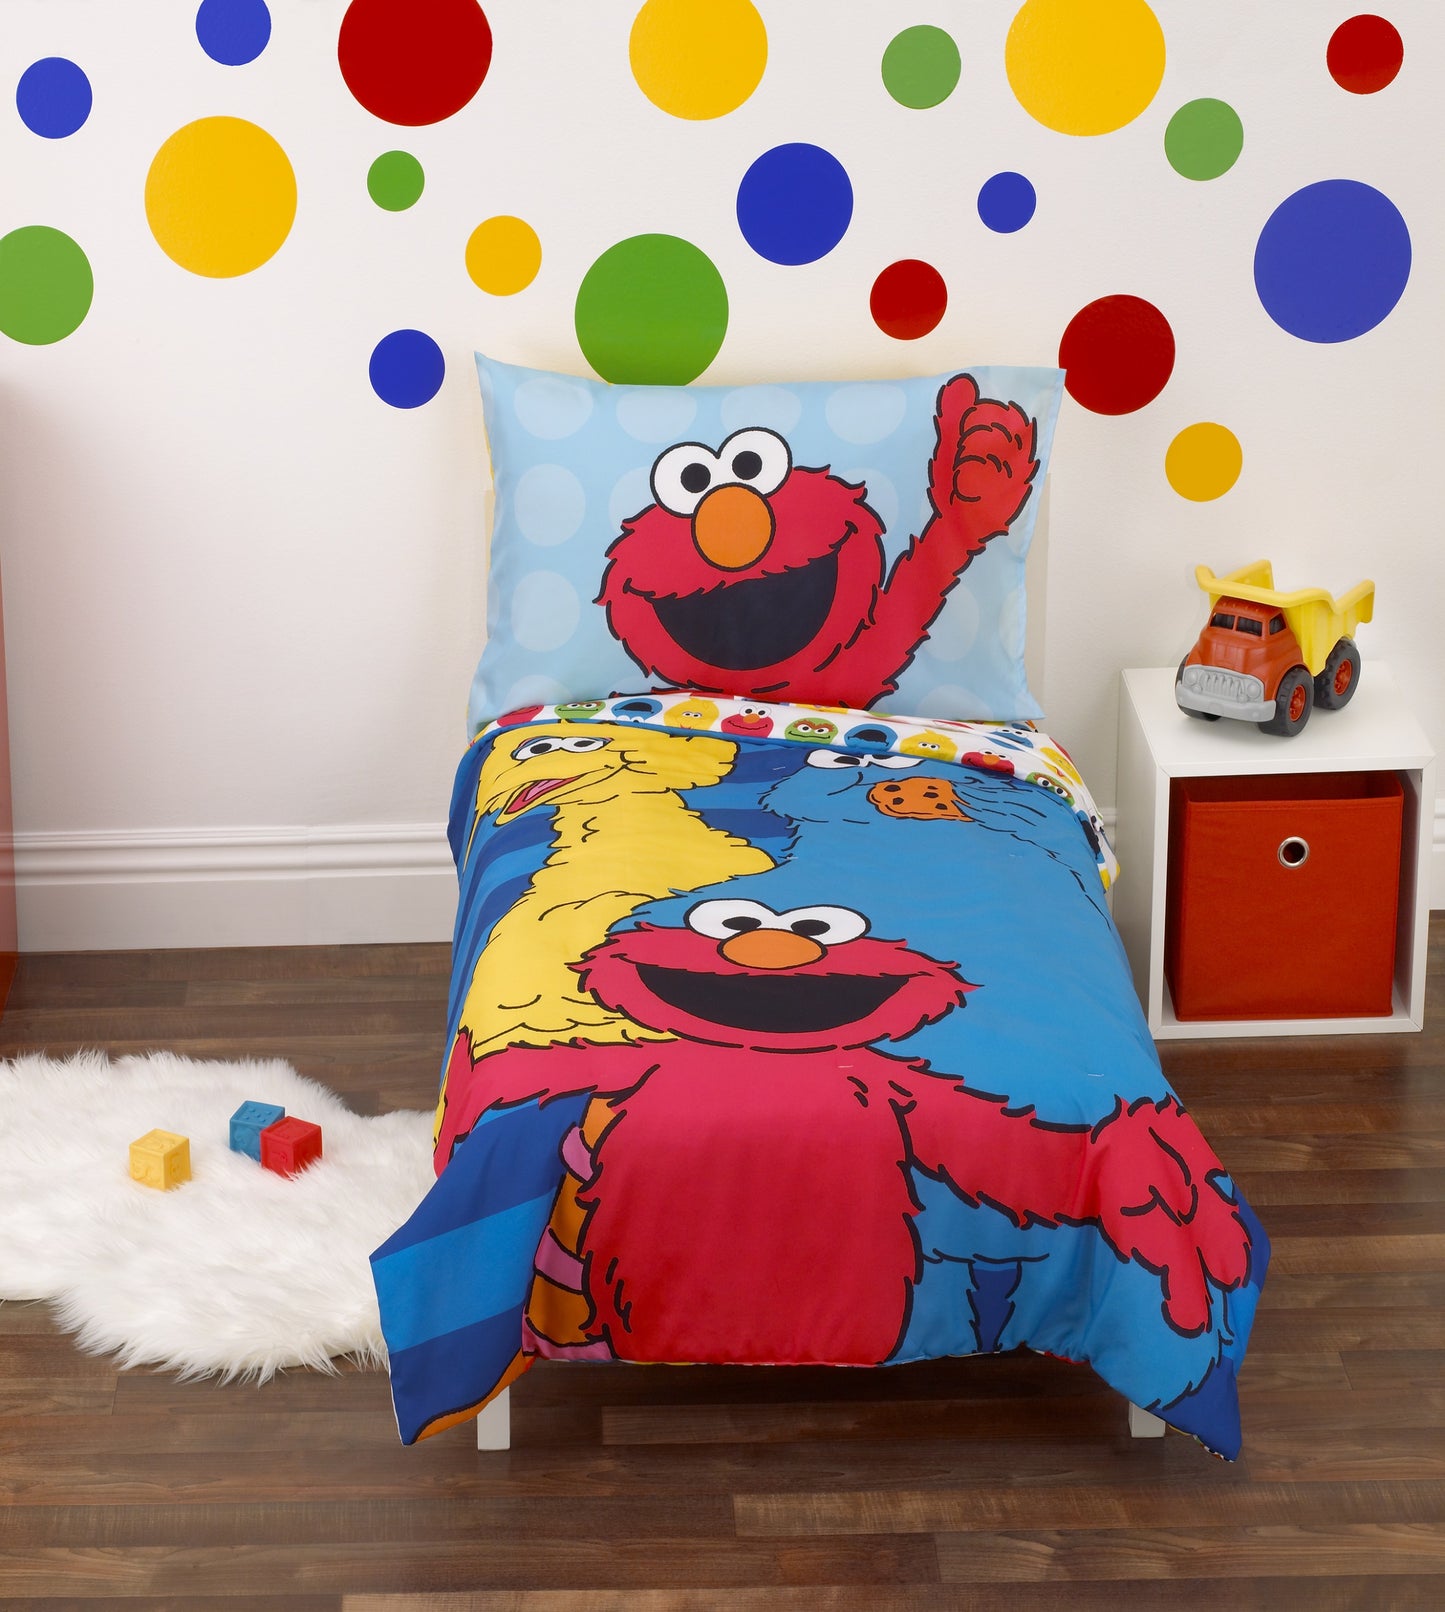 Sesame Street Sesame Street - Yellow, Blue, Red 2 Piece Toddler Sheet Set with Fitted Crib Sheet and Pillowcase